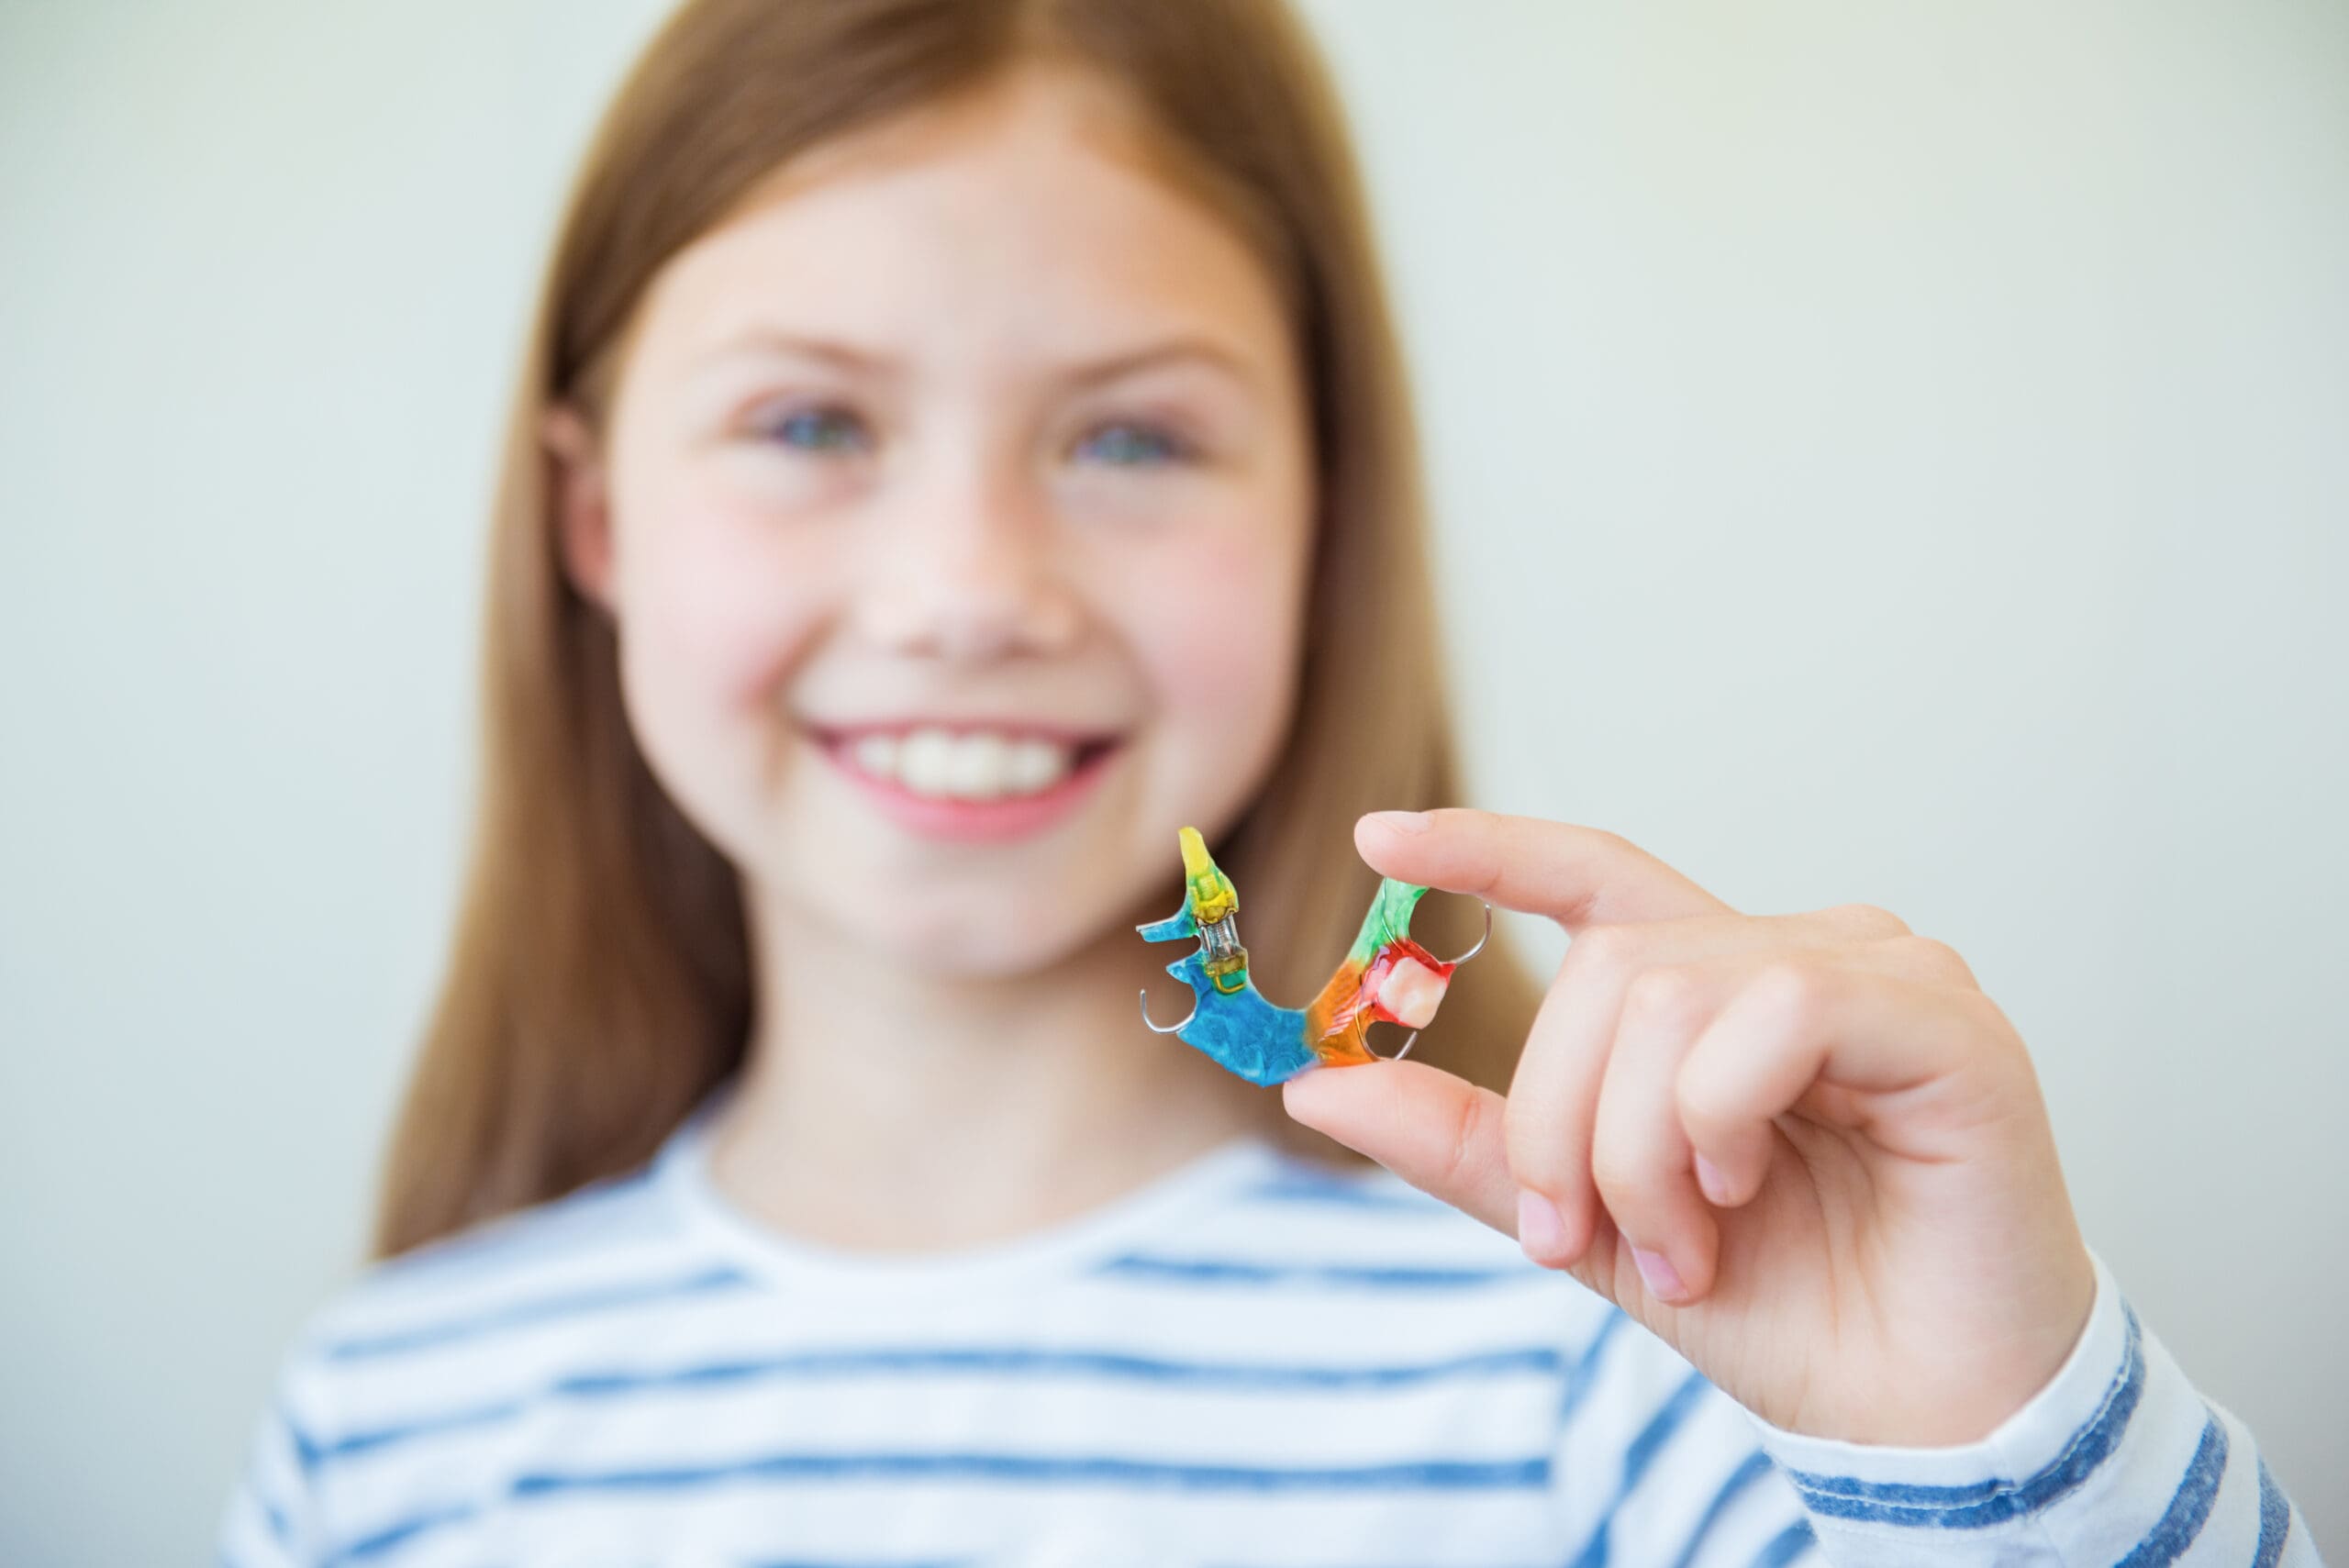 A young girl showcasing her orthodontic process with a small origami model.